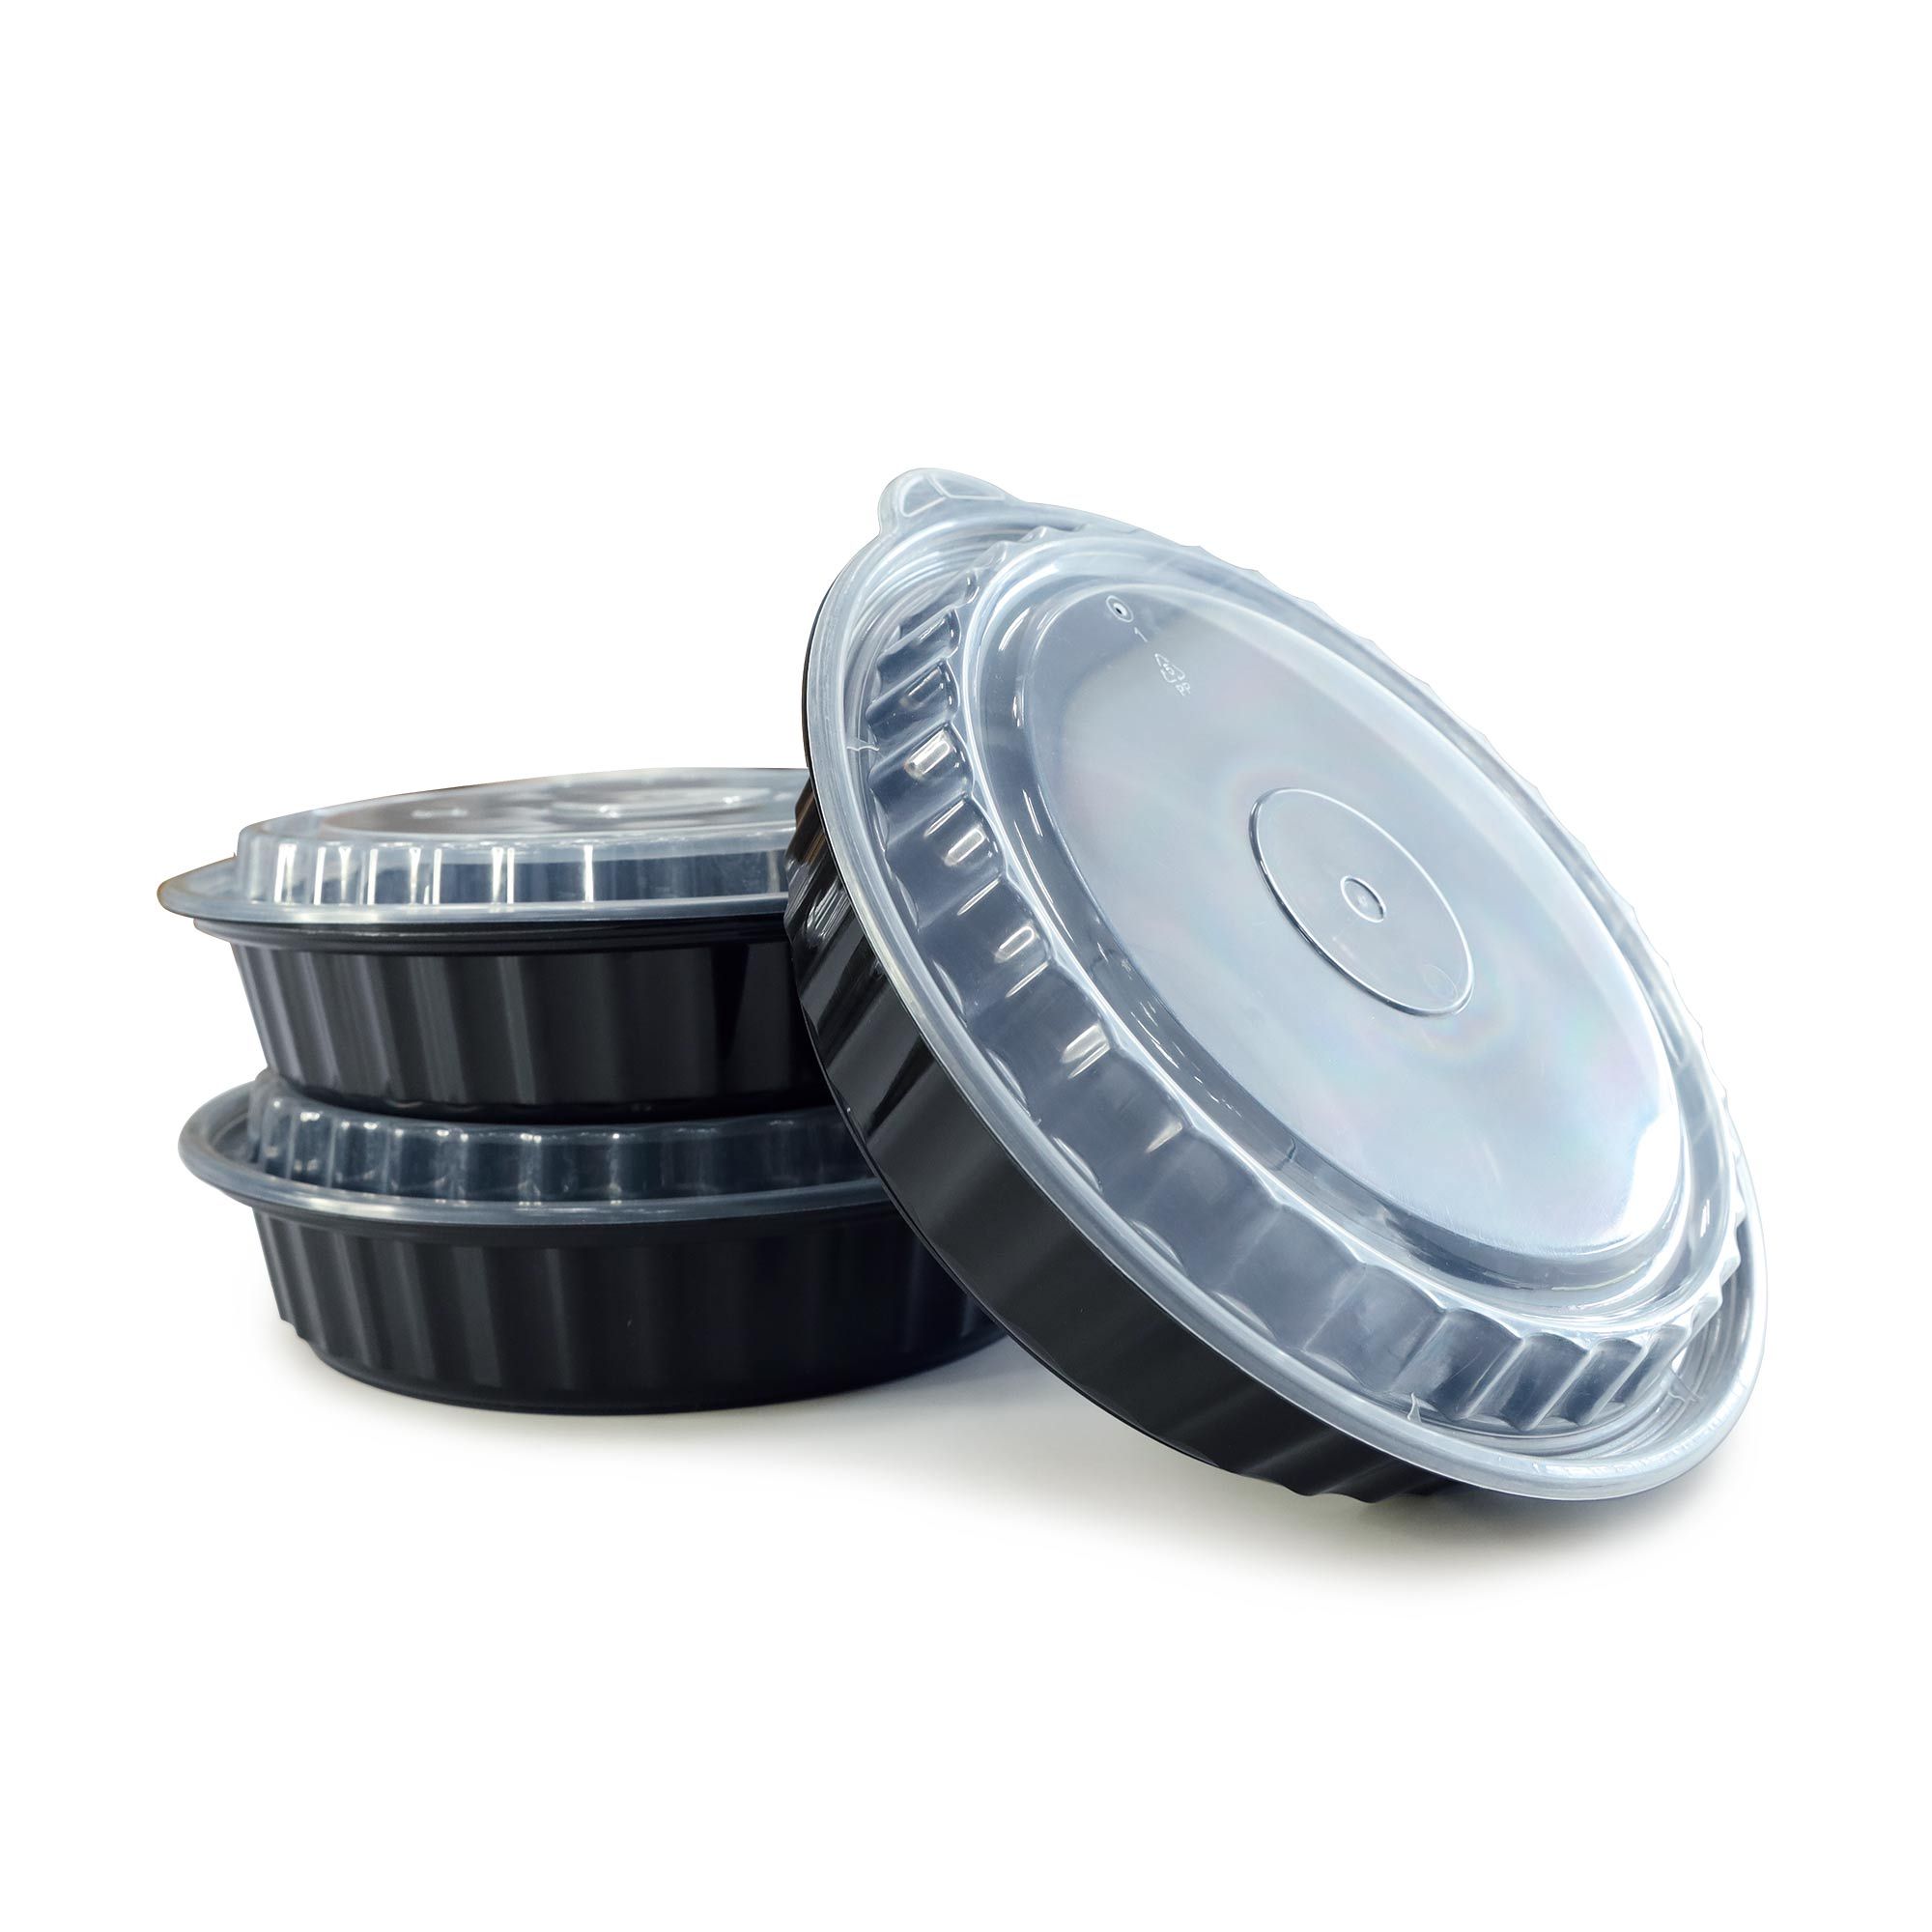 Disposable Microwave Food Container